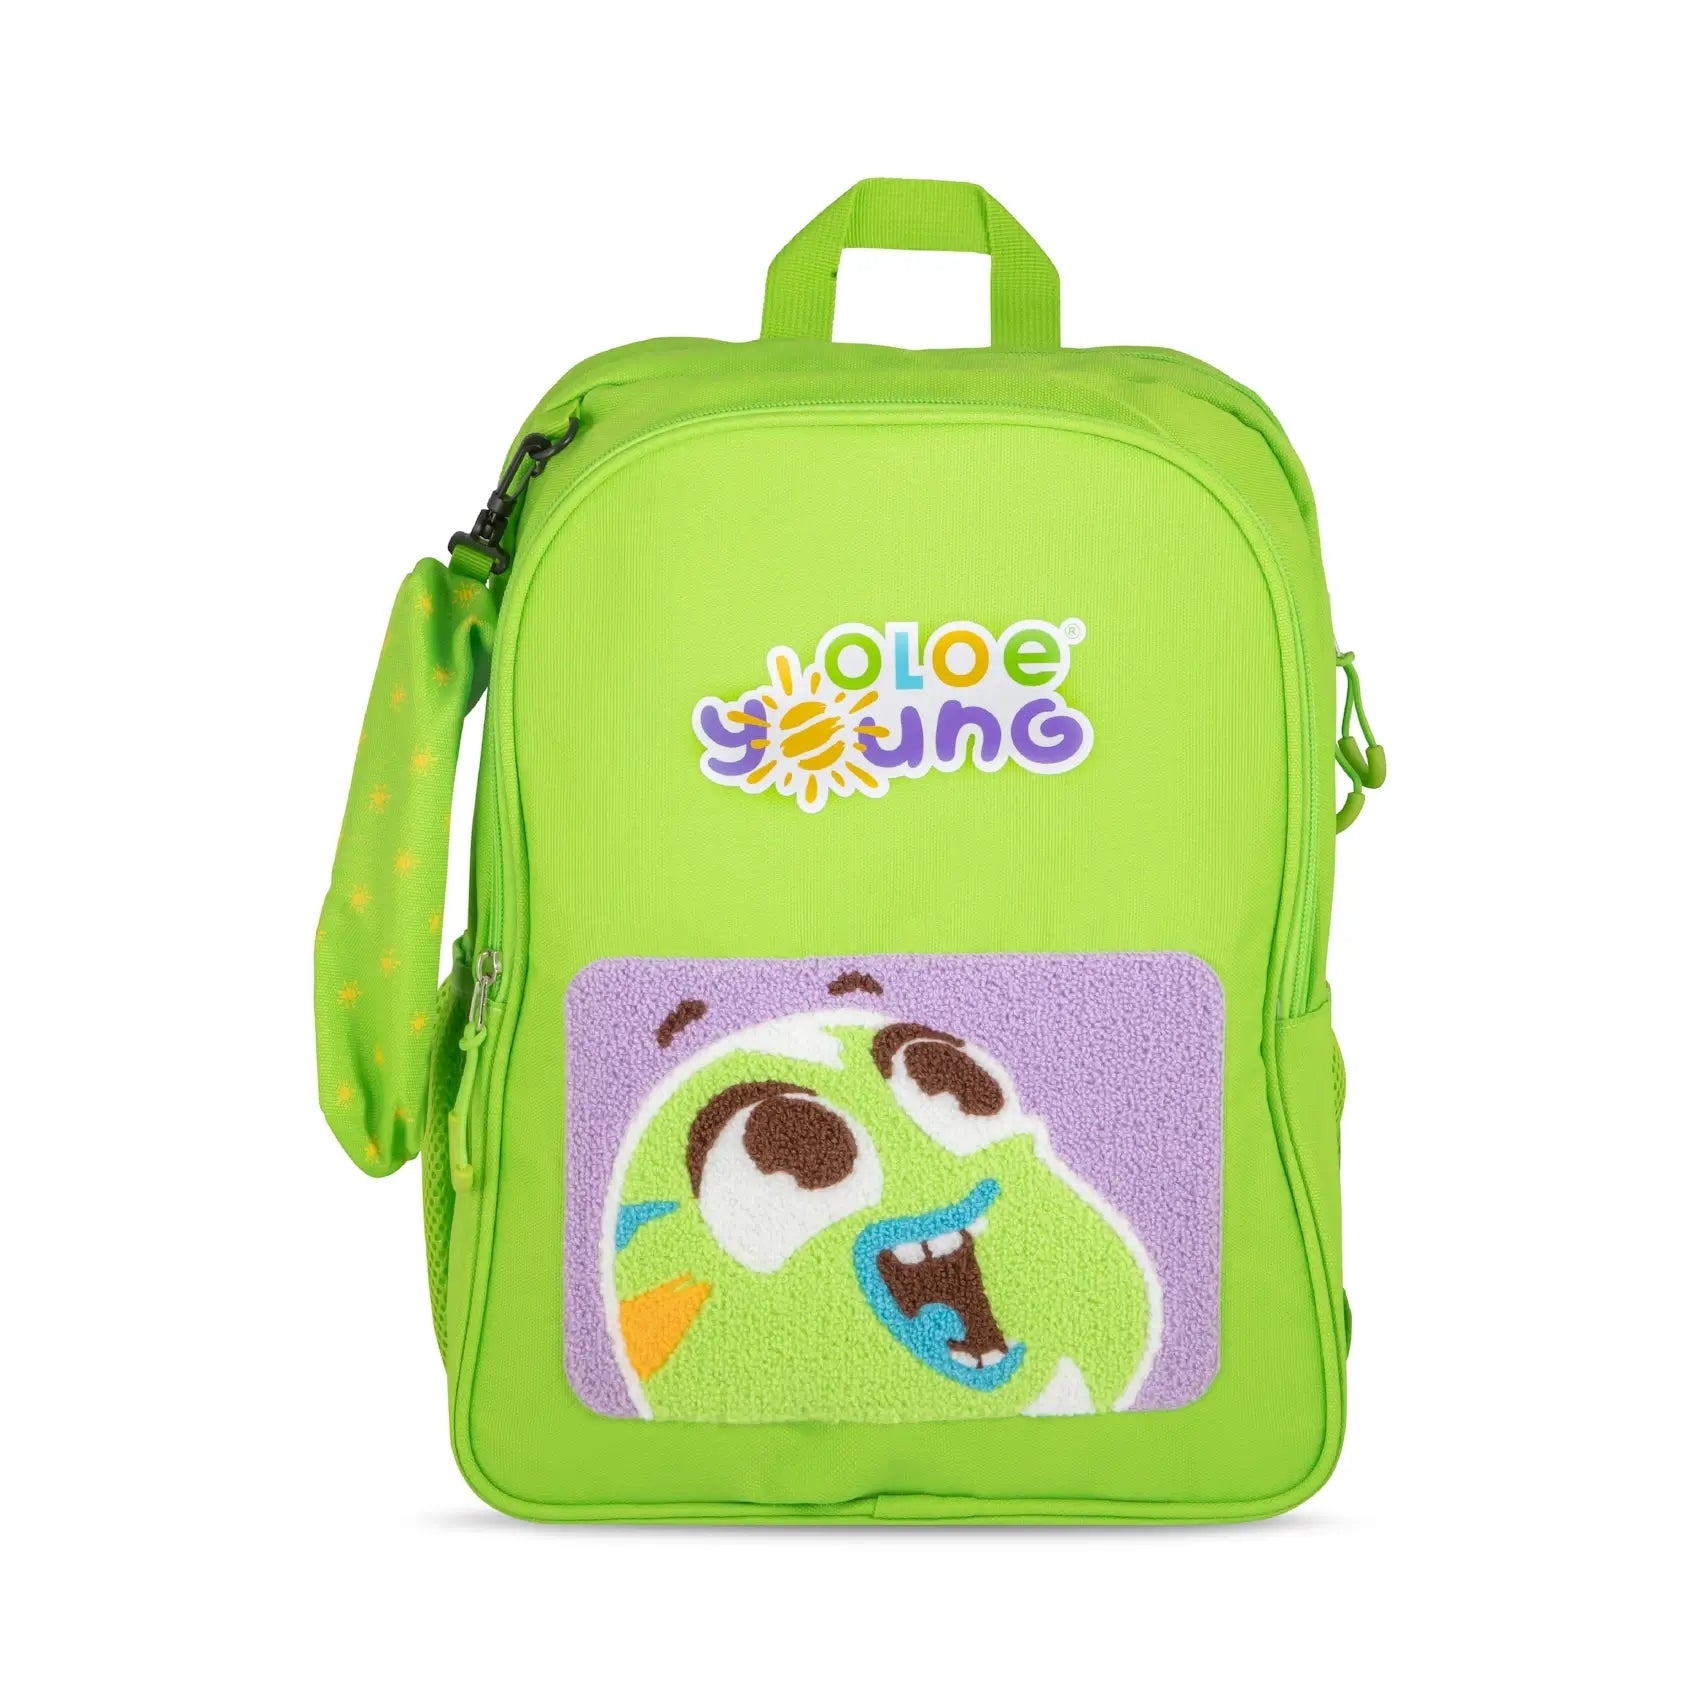 oloe-plush-character-backpack-lozi-green-front-facing